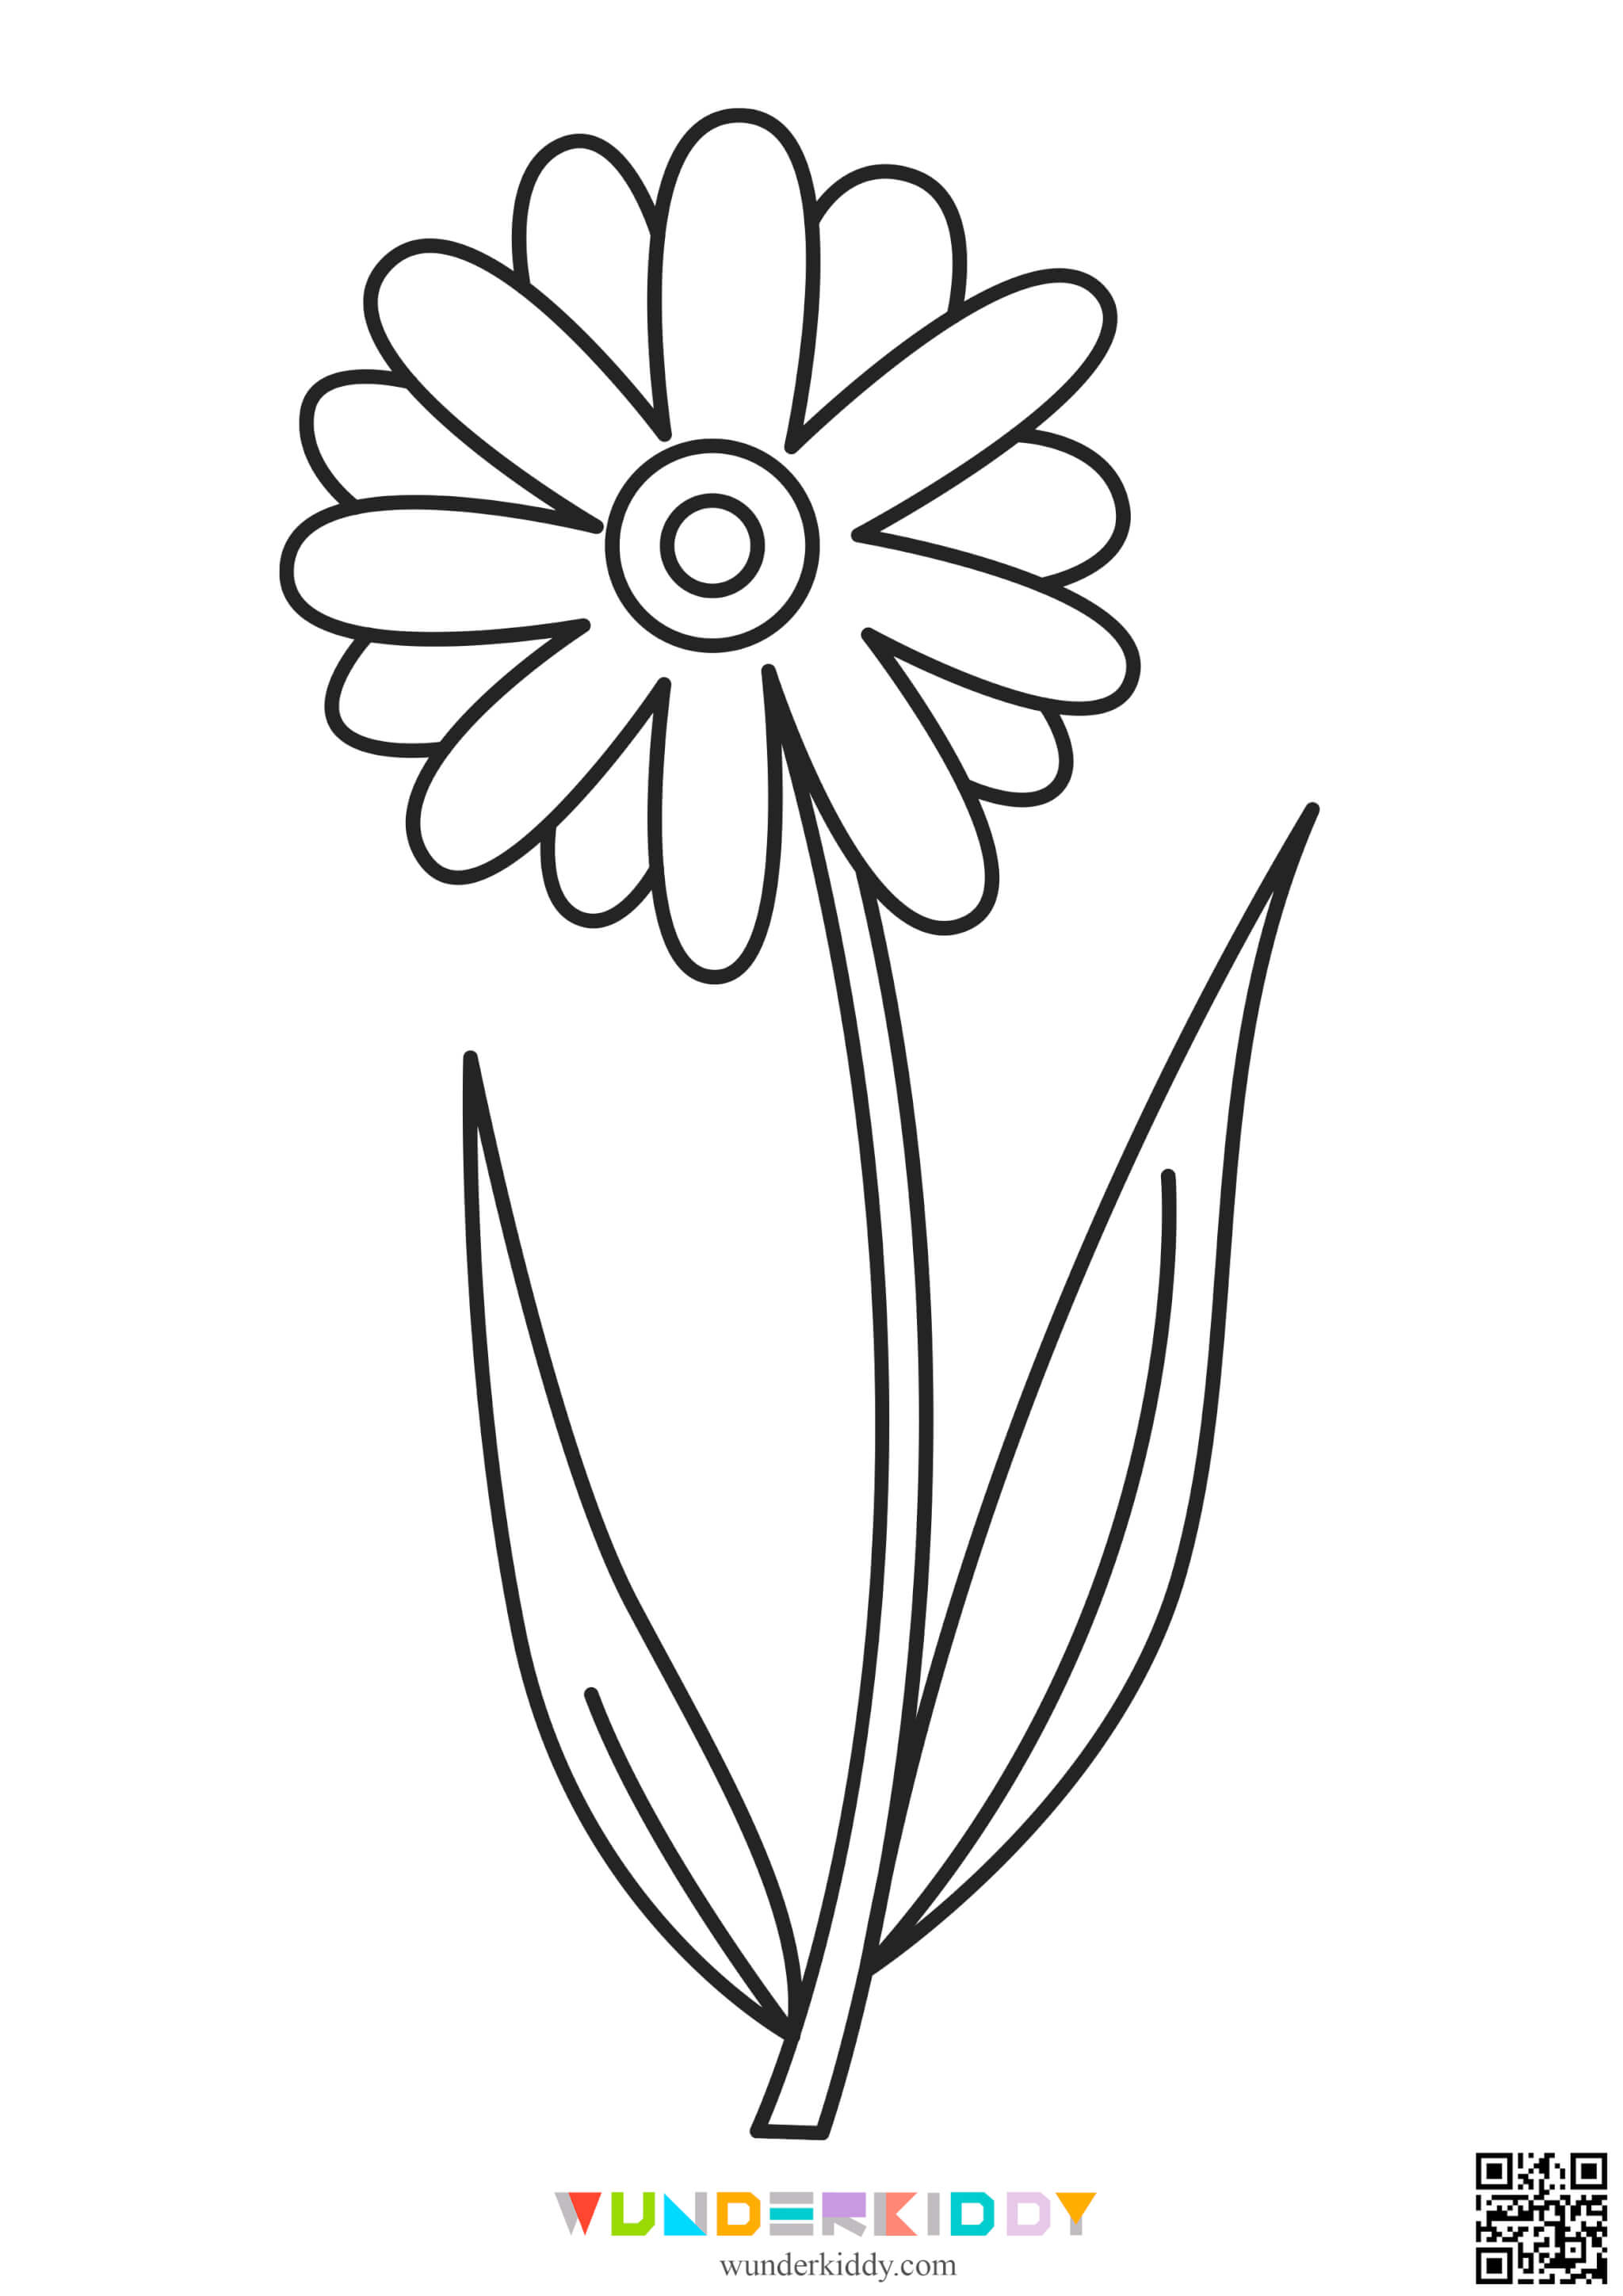 Flower Printable Coloring Pages - Image 15